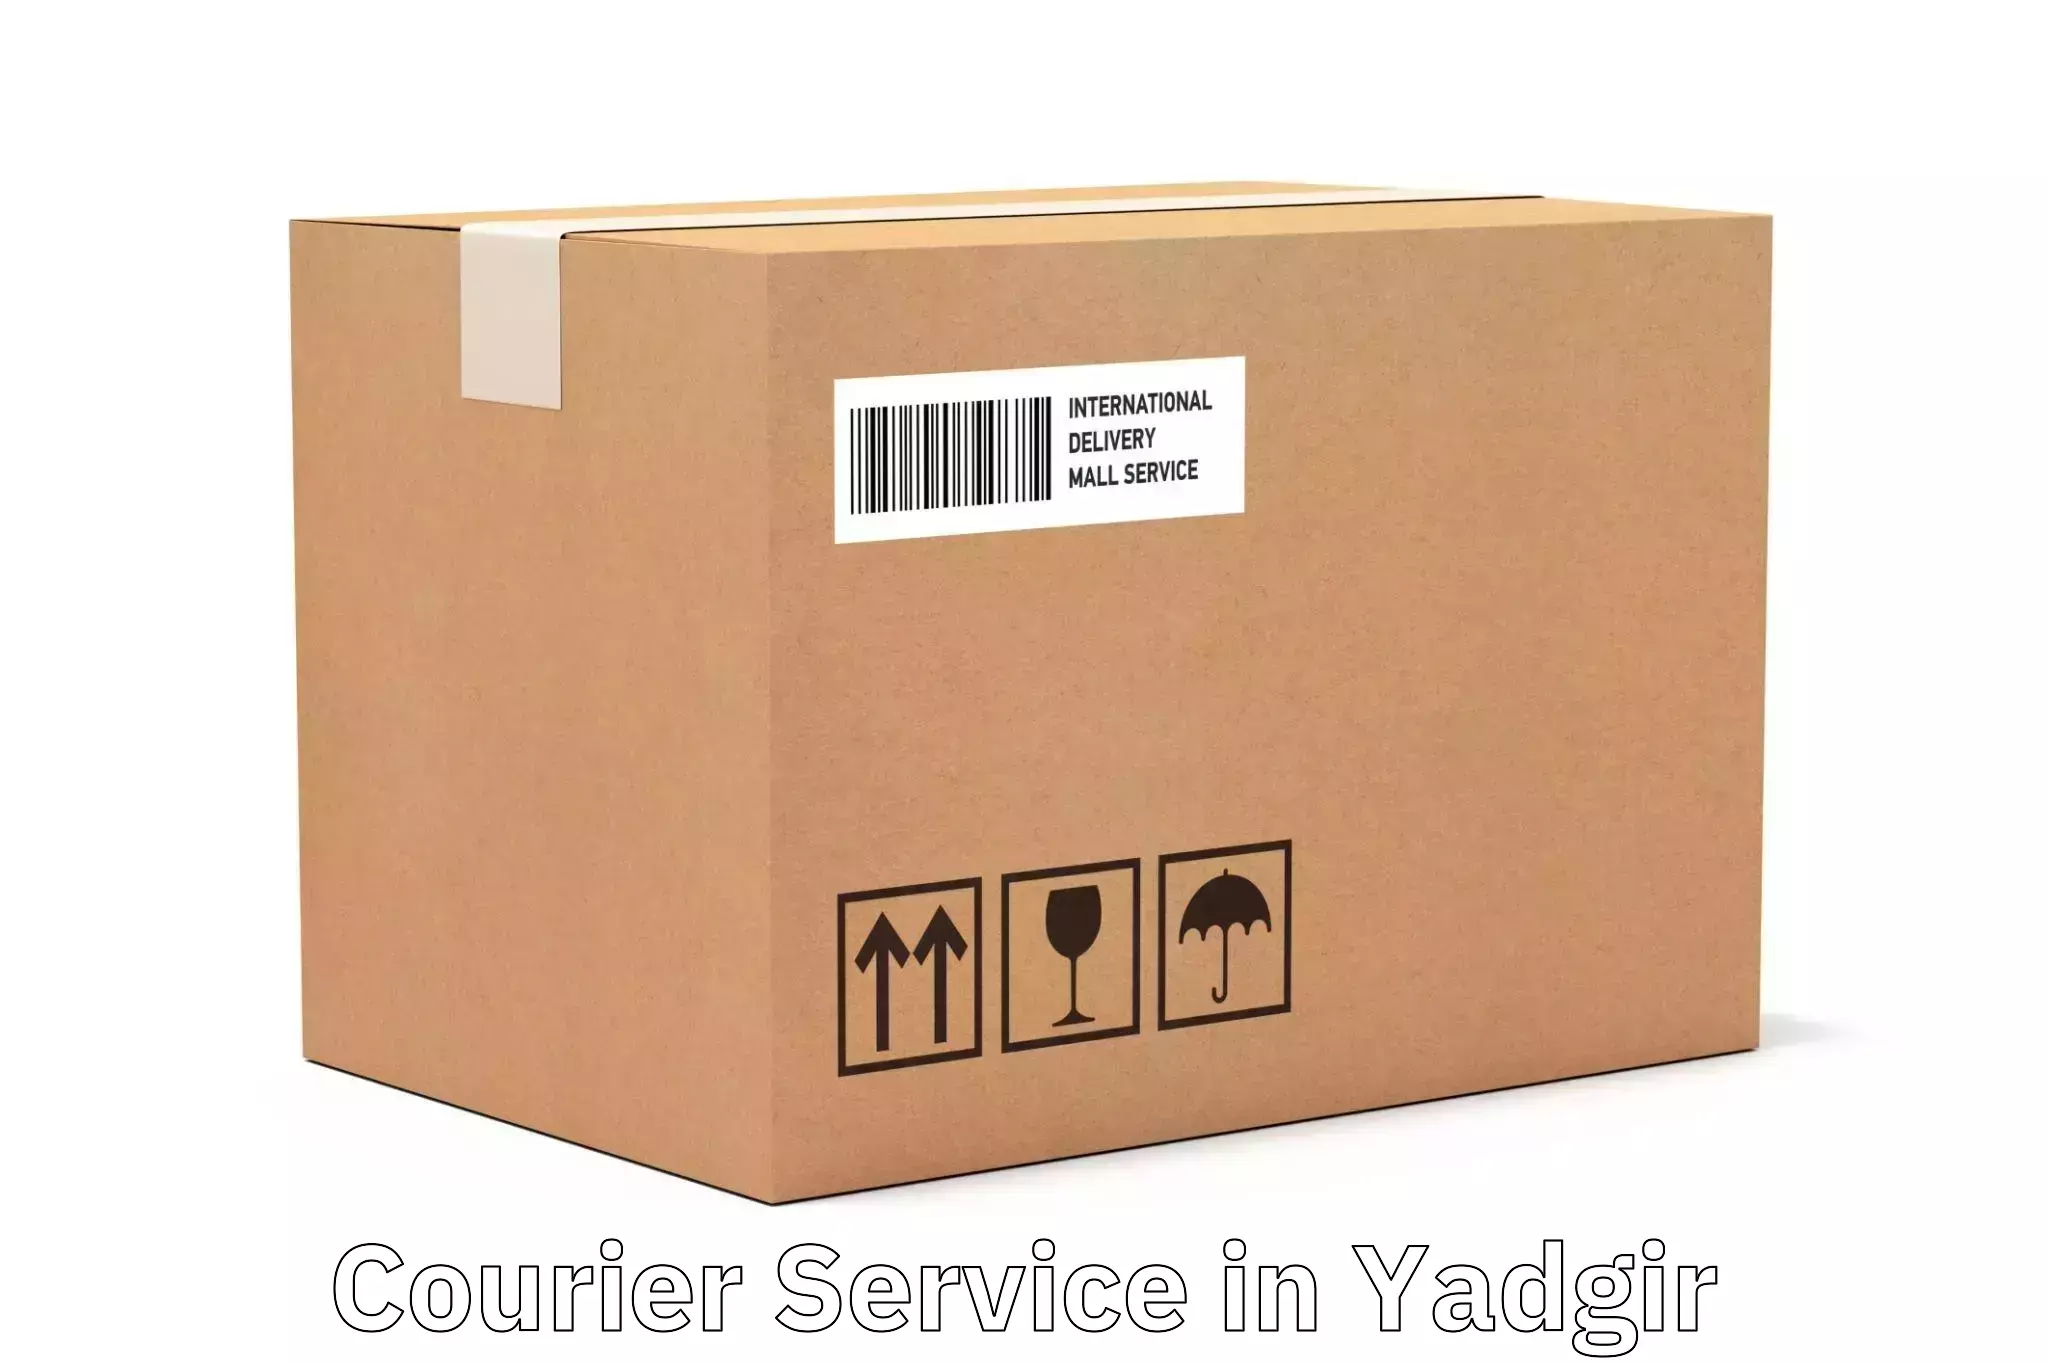 Parcel service for businesses in Yadgir